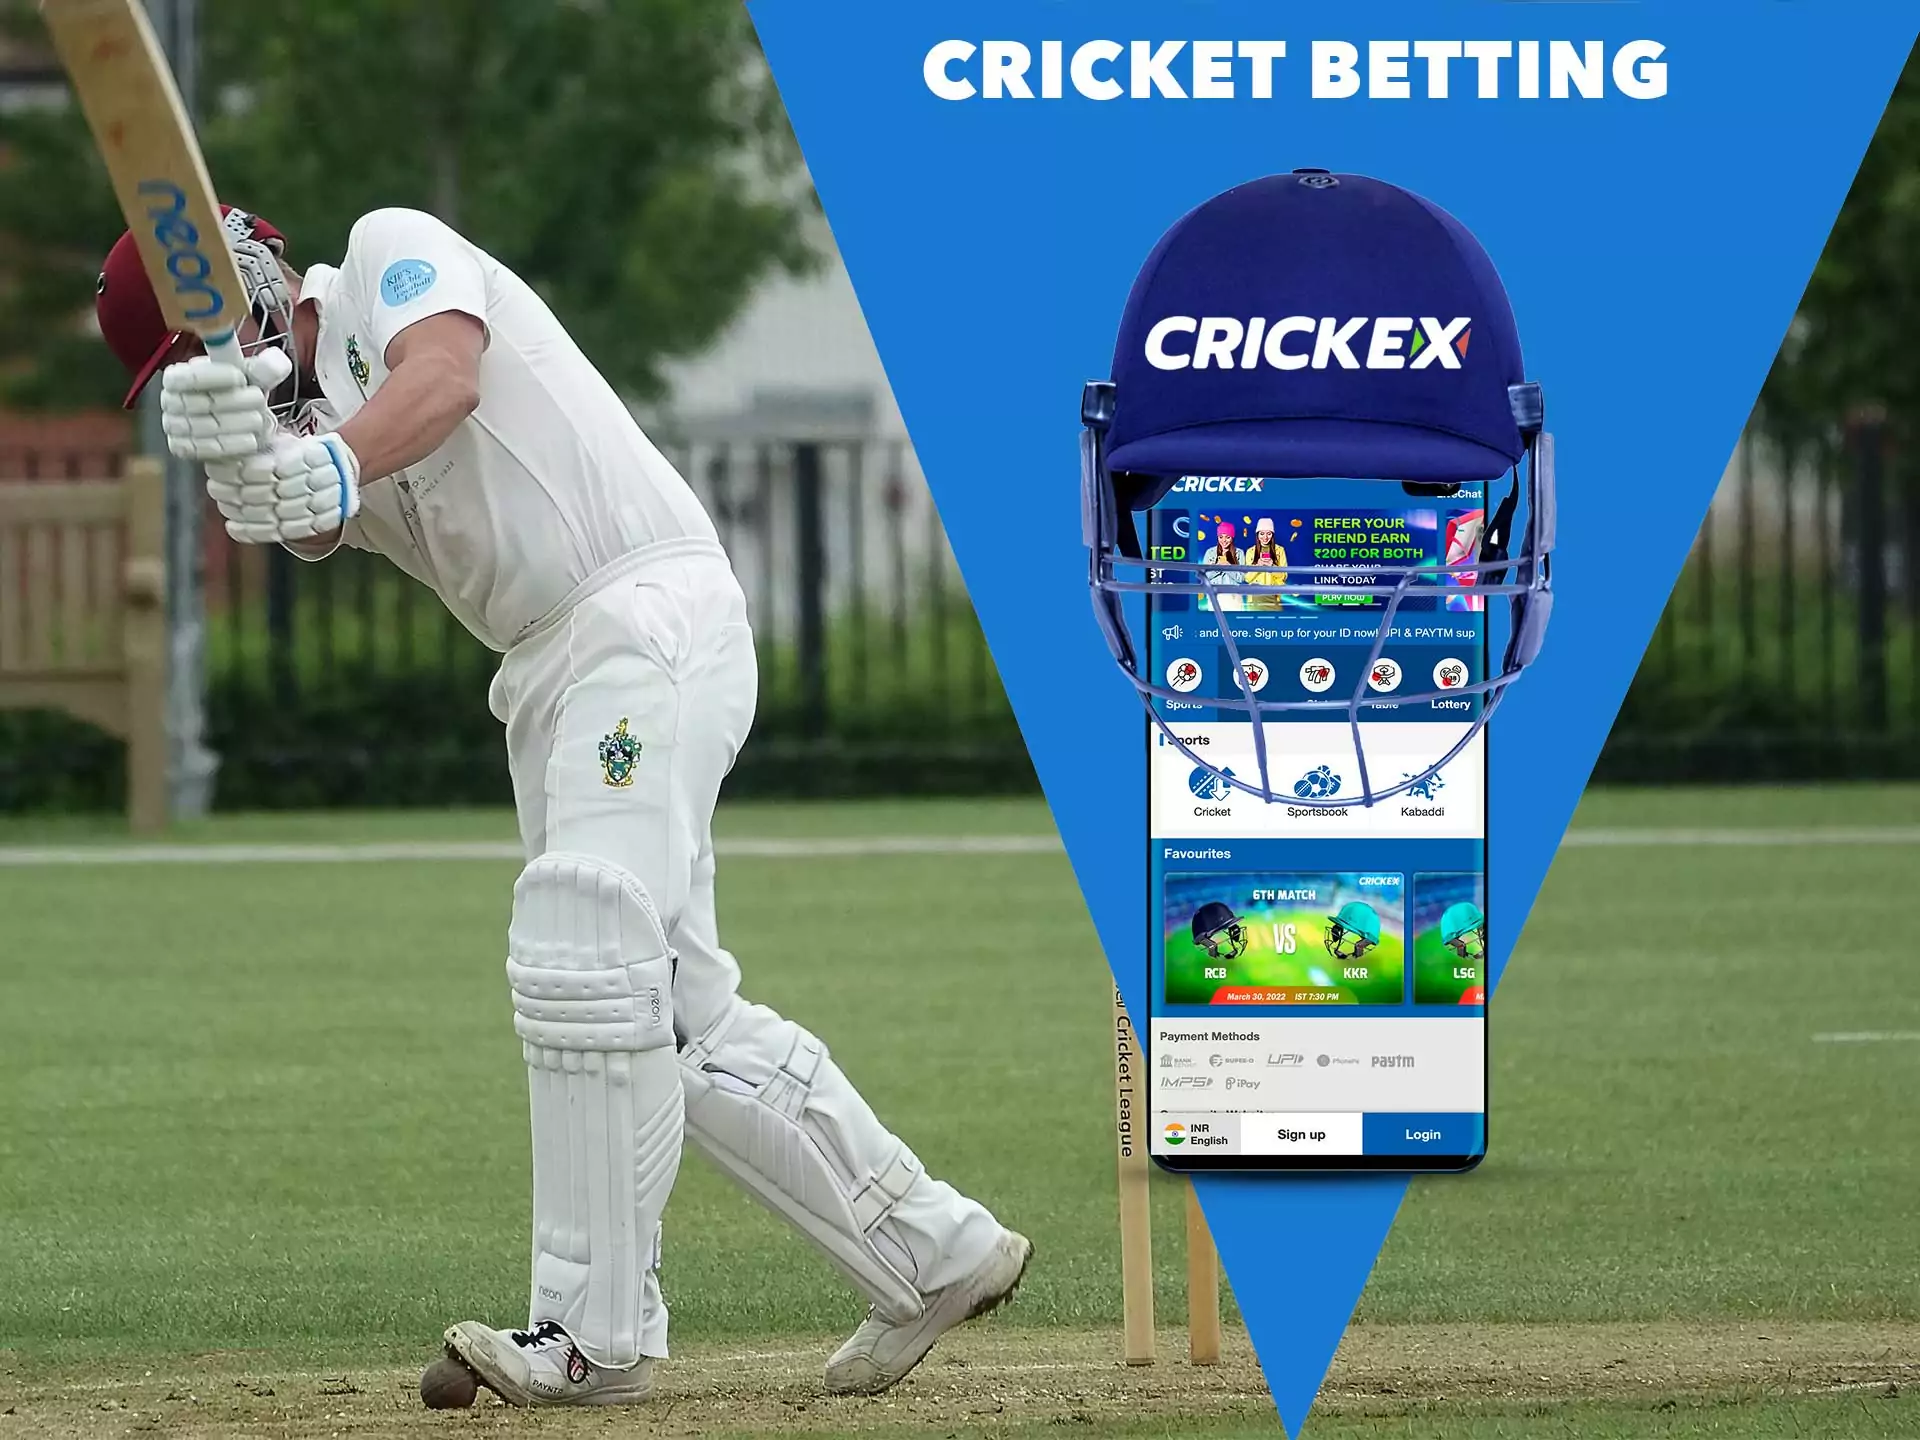 You can bet on cricket at Crickex legally.